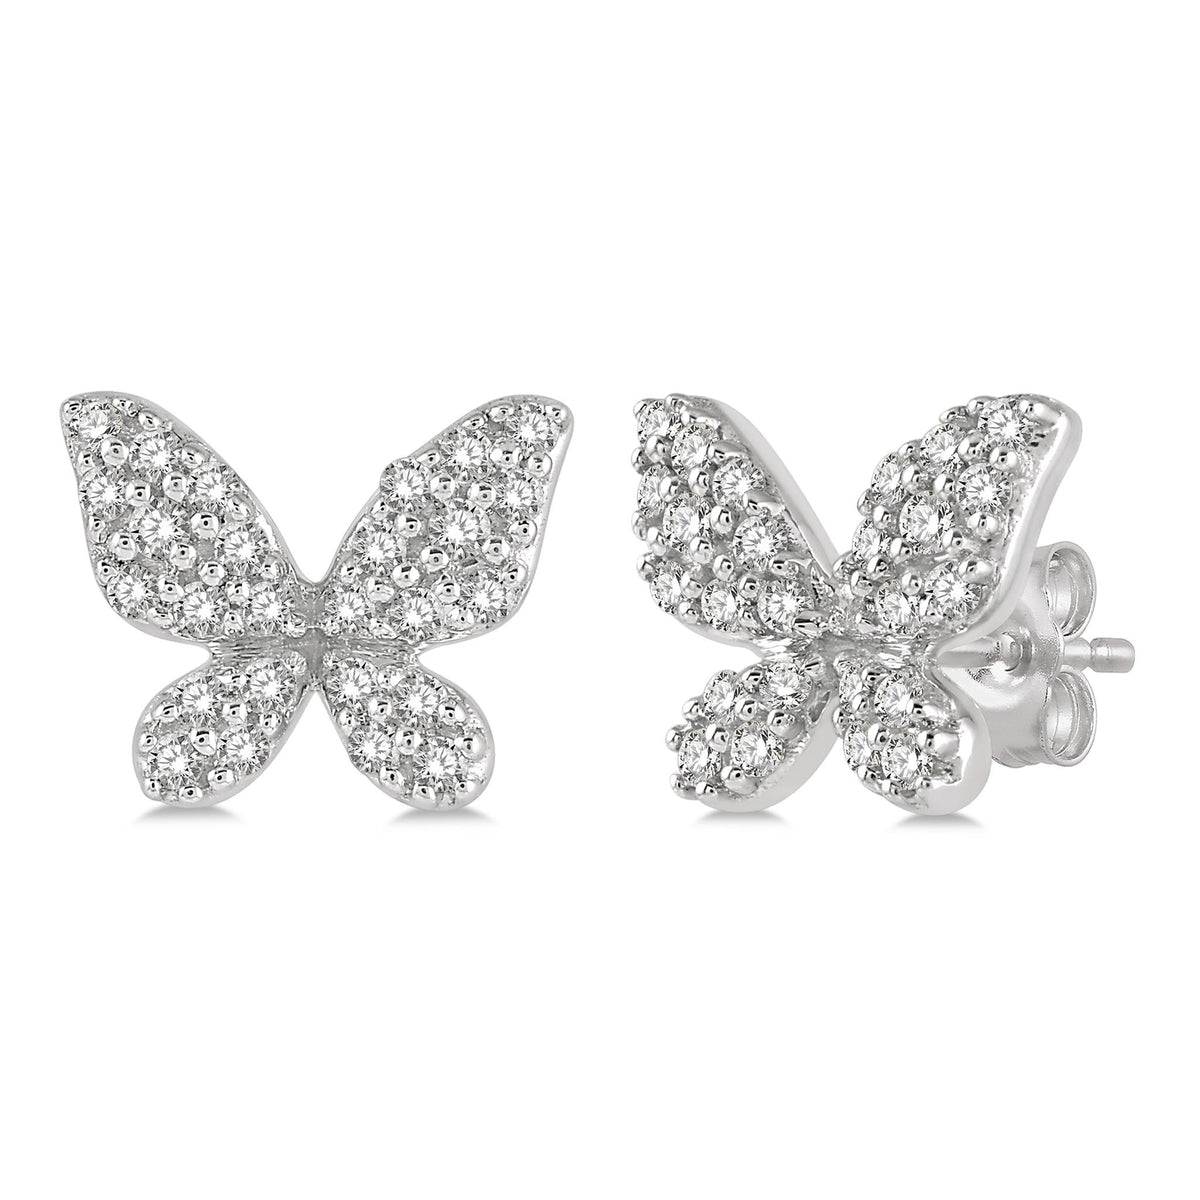 Lasker Petites-10Kt White Gold Butterfly Stud Earrings with 0.20cttw Natural Diamonds